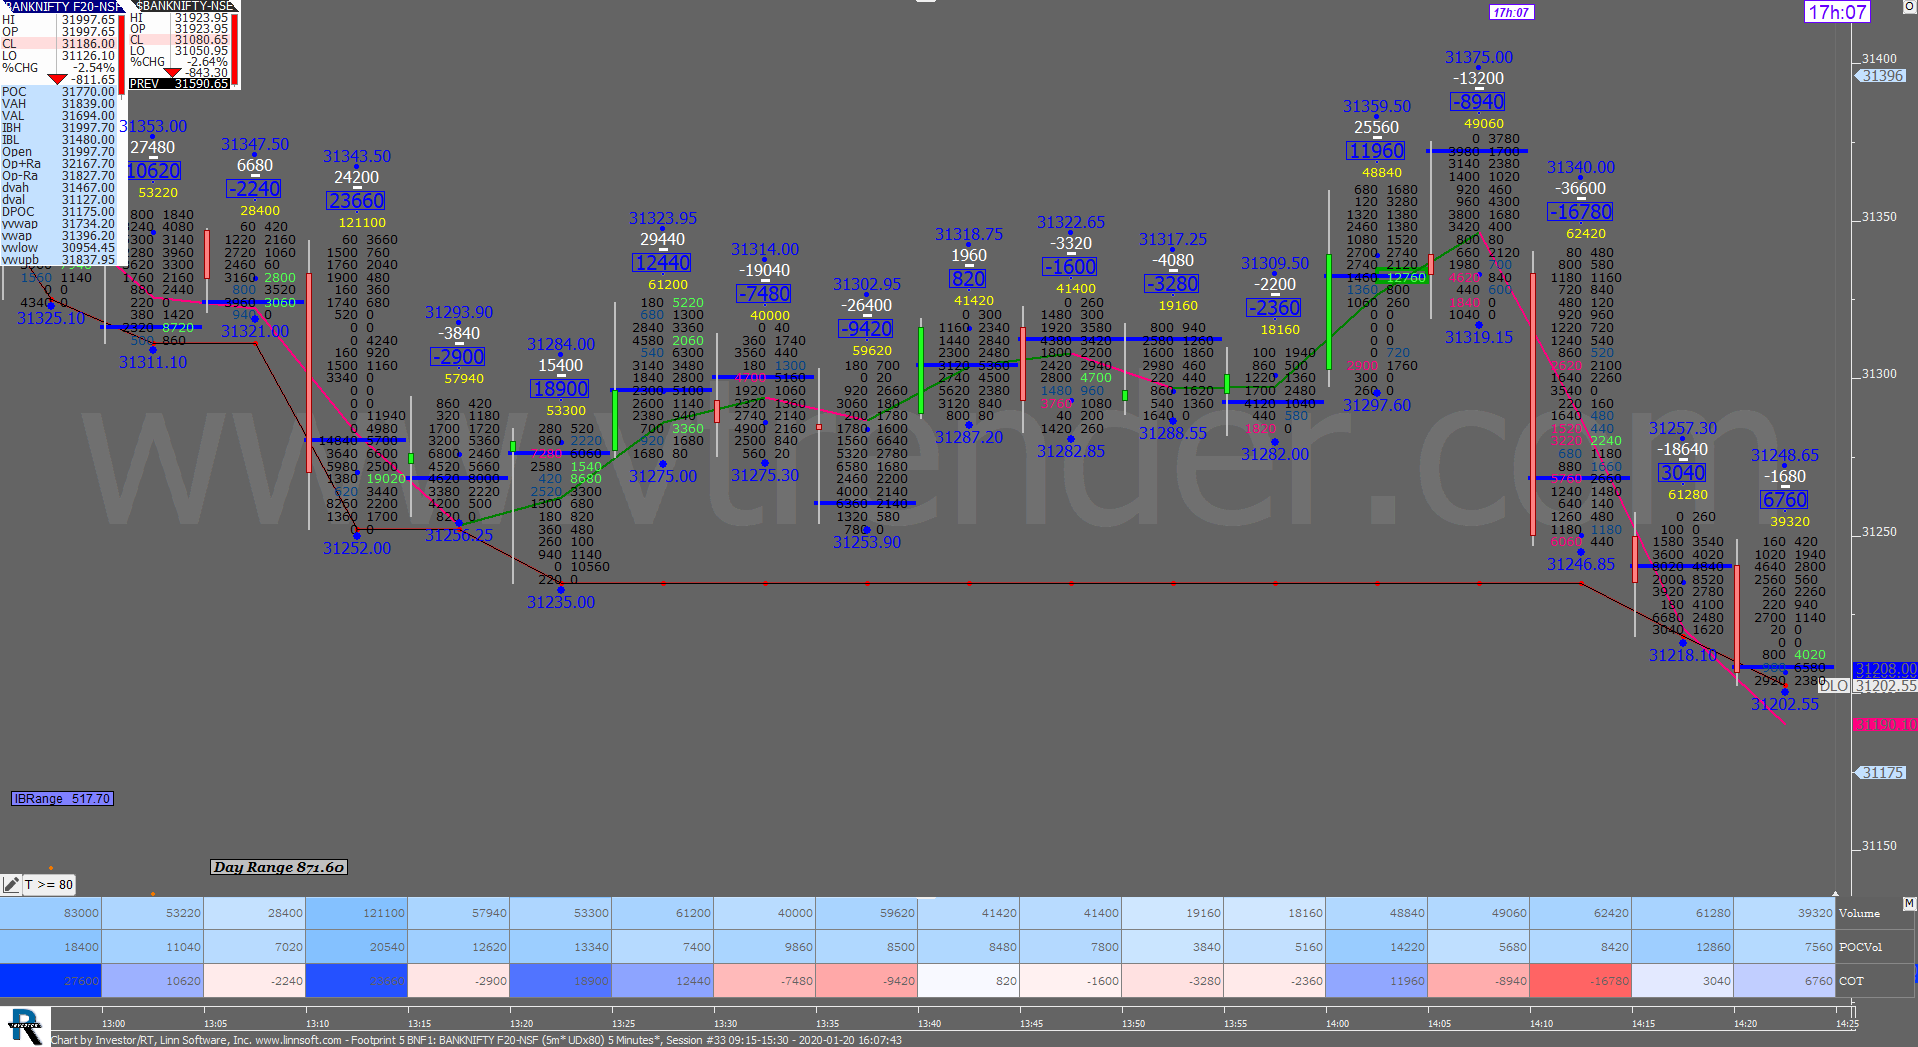 4 25 Order Flow Charts Dated 20Th Jan 2020 (5 Mins) Banknifty Futures, Day Trading, Intraday Trading, Intraday Trading Strategies, Nifty Futures, Order Flow Analysis, Support And Resistance, Trading Strategies, Volume Profile Trading